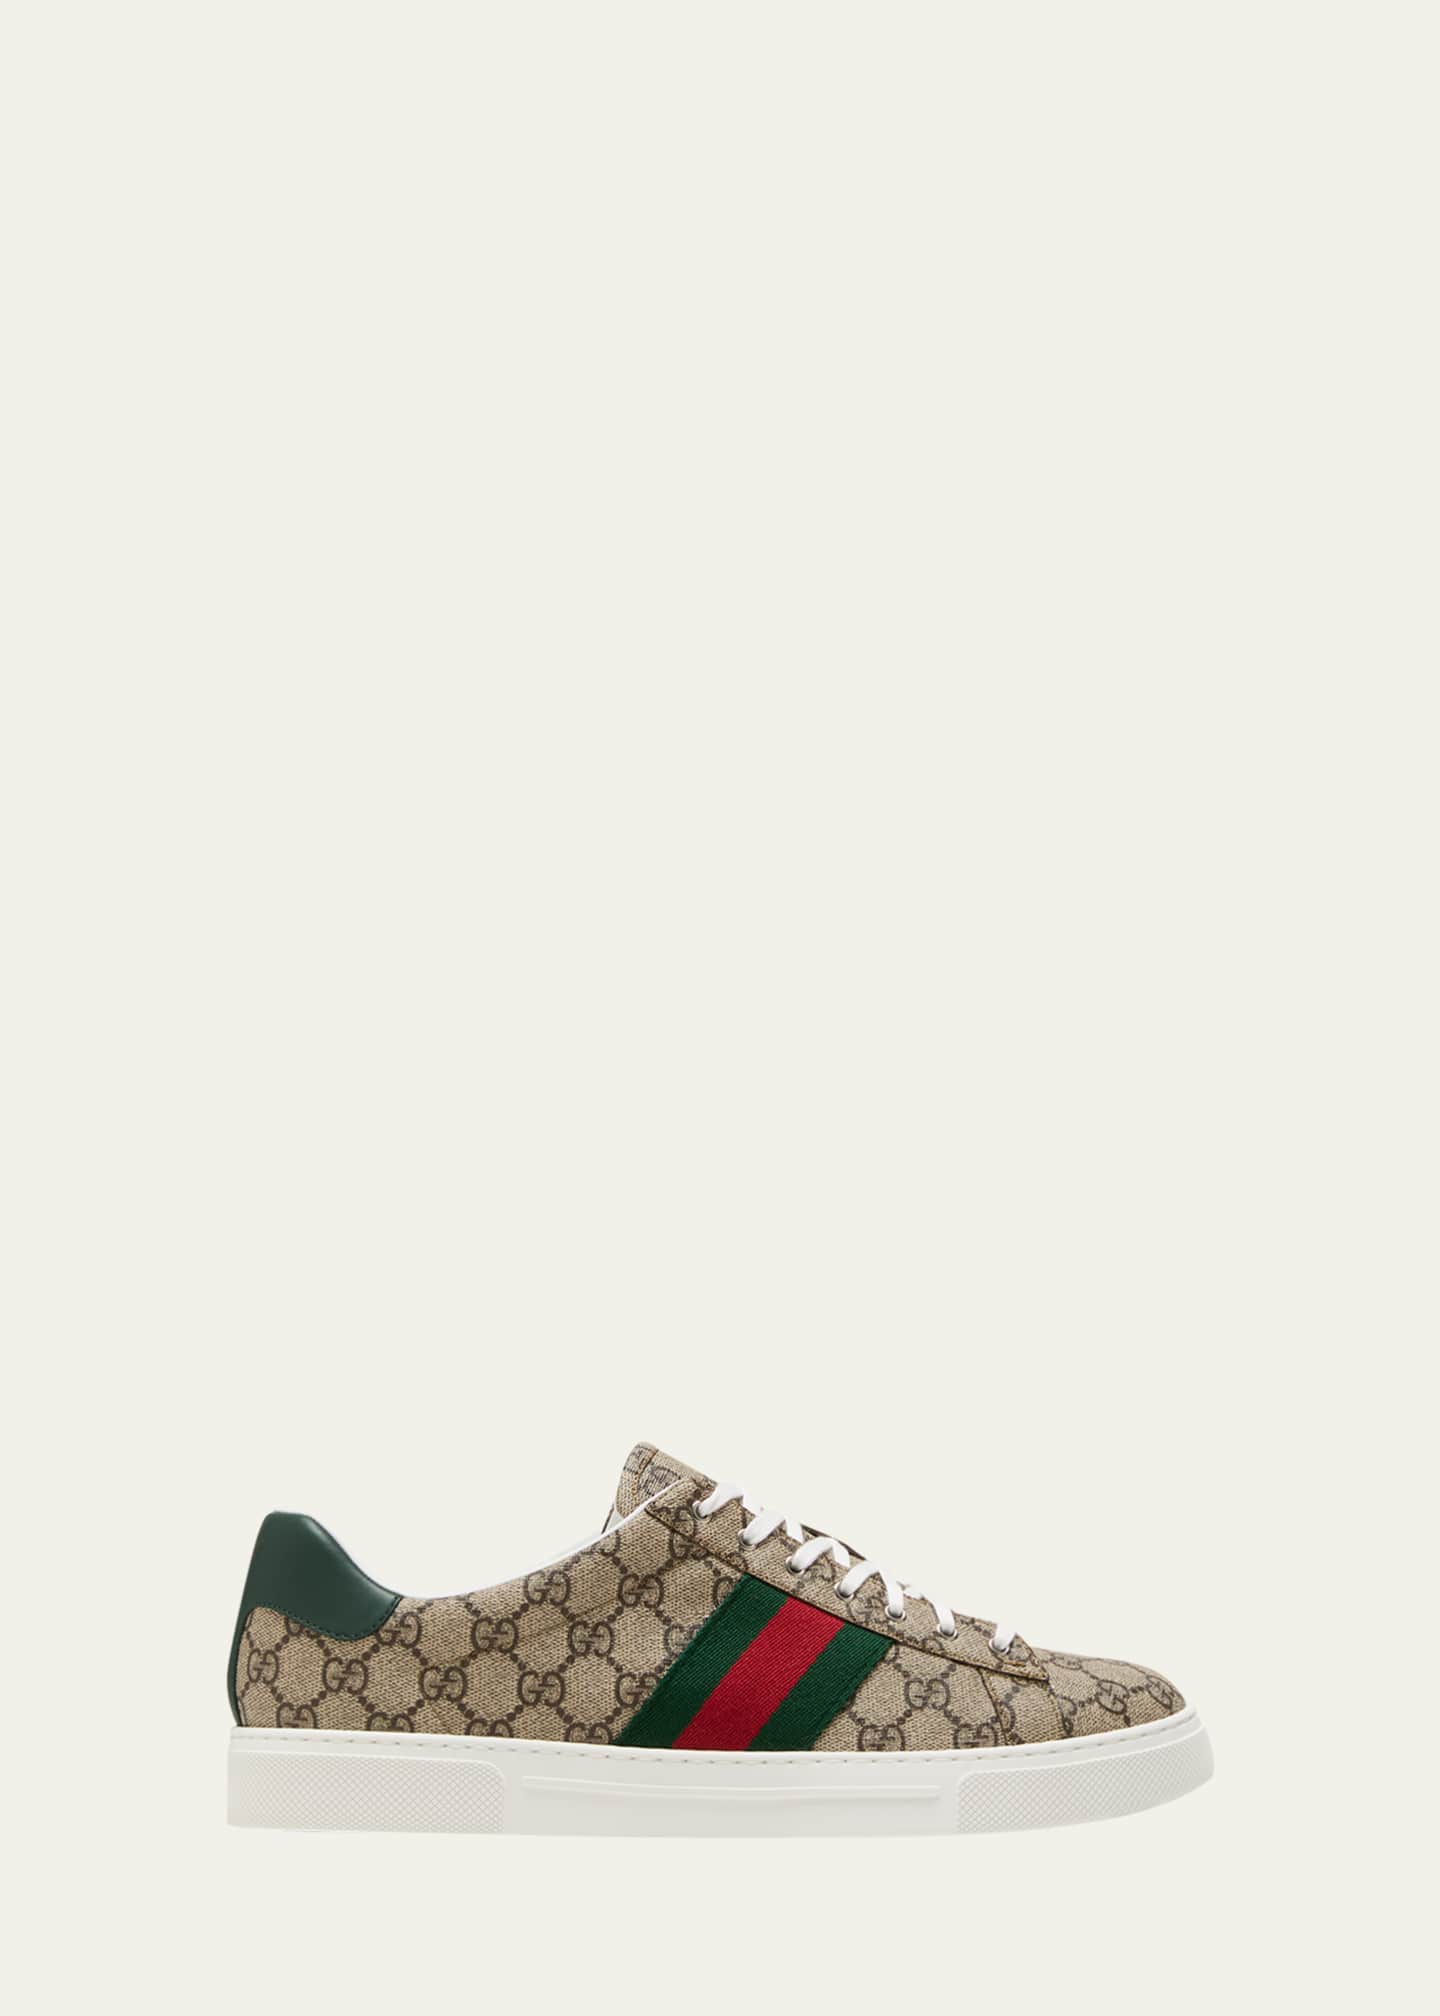 Gucci Men's Gucci Ace Low-Top Sneakers with Web - Bergdorf Goodman